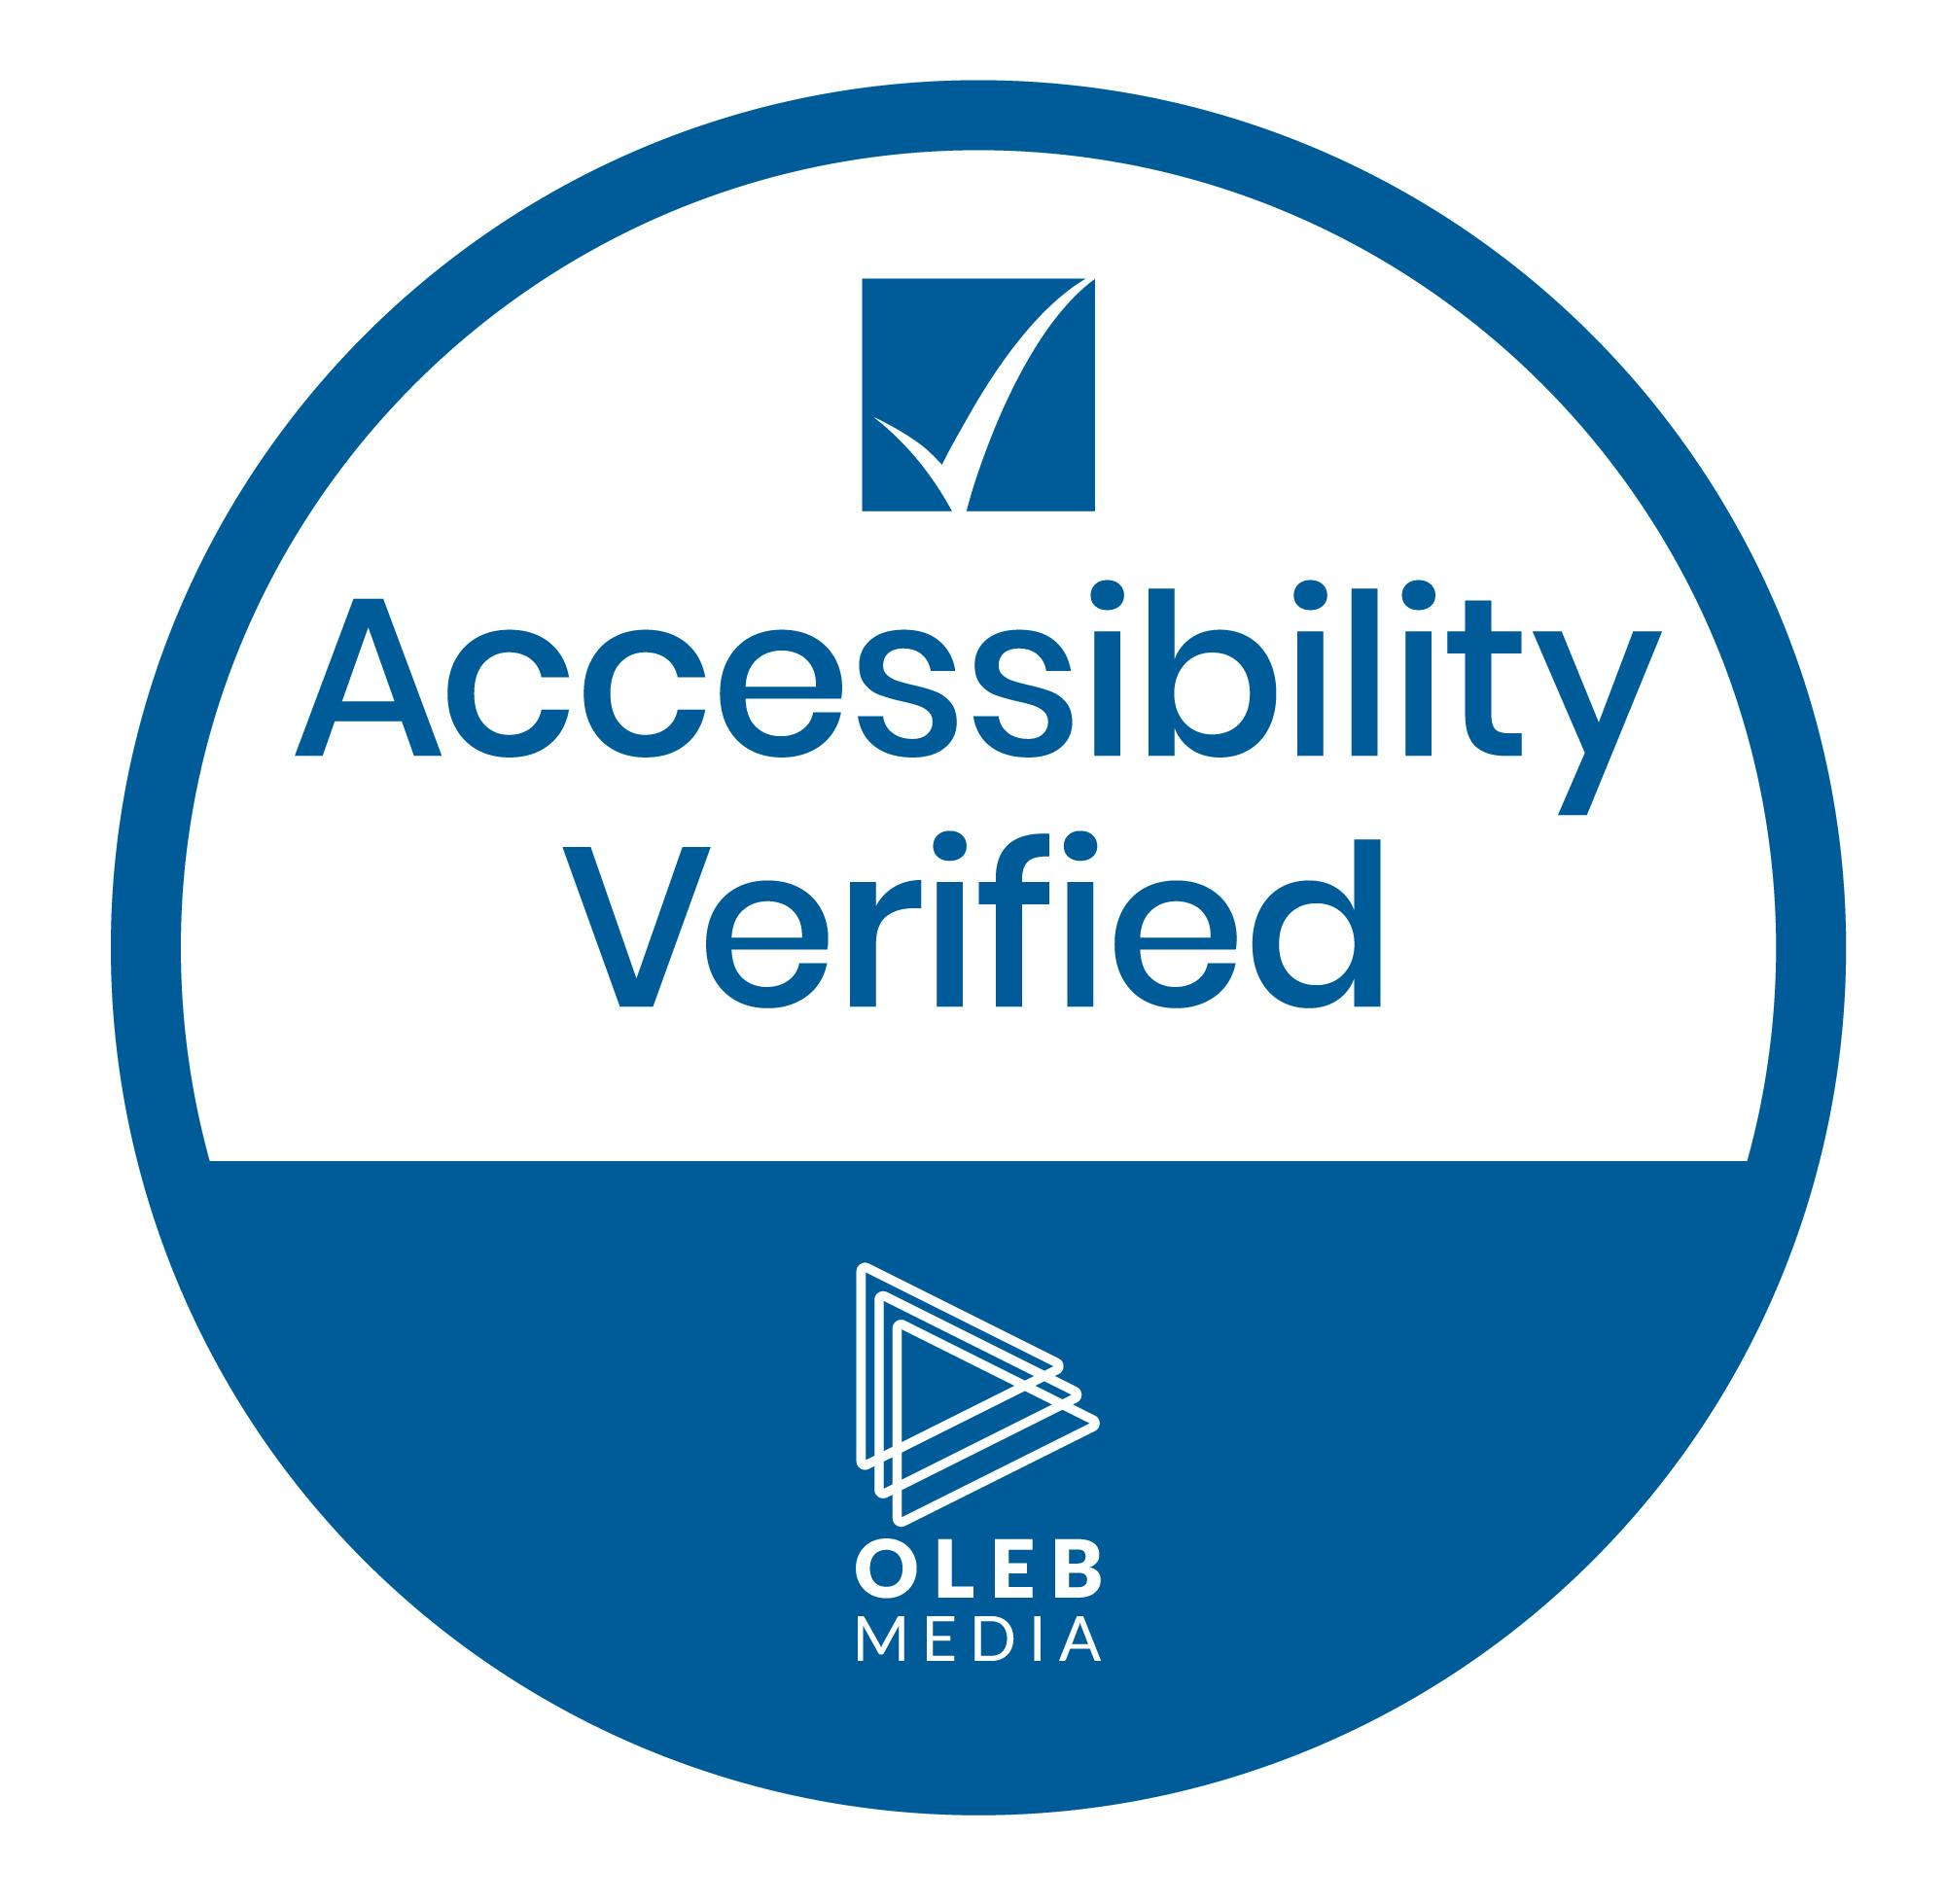 Accessibility Certificate from Oleb Media

